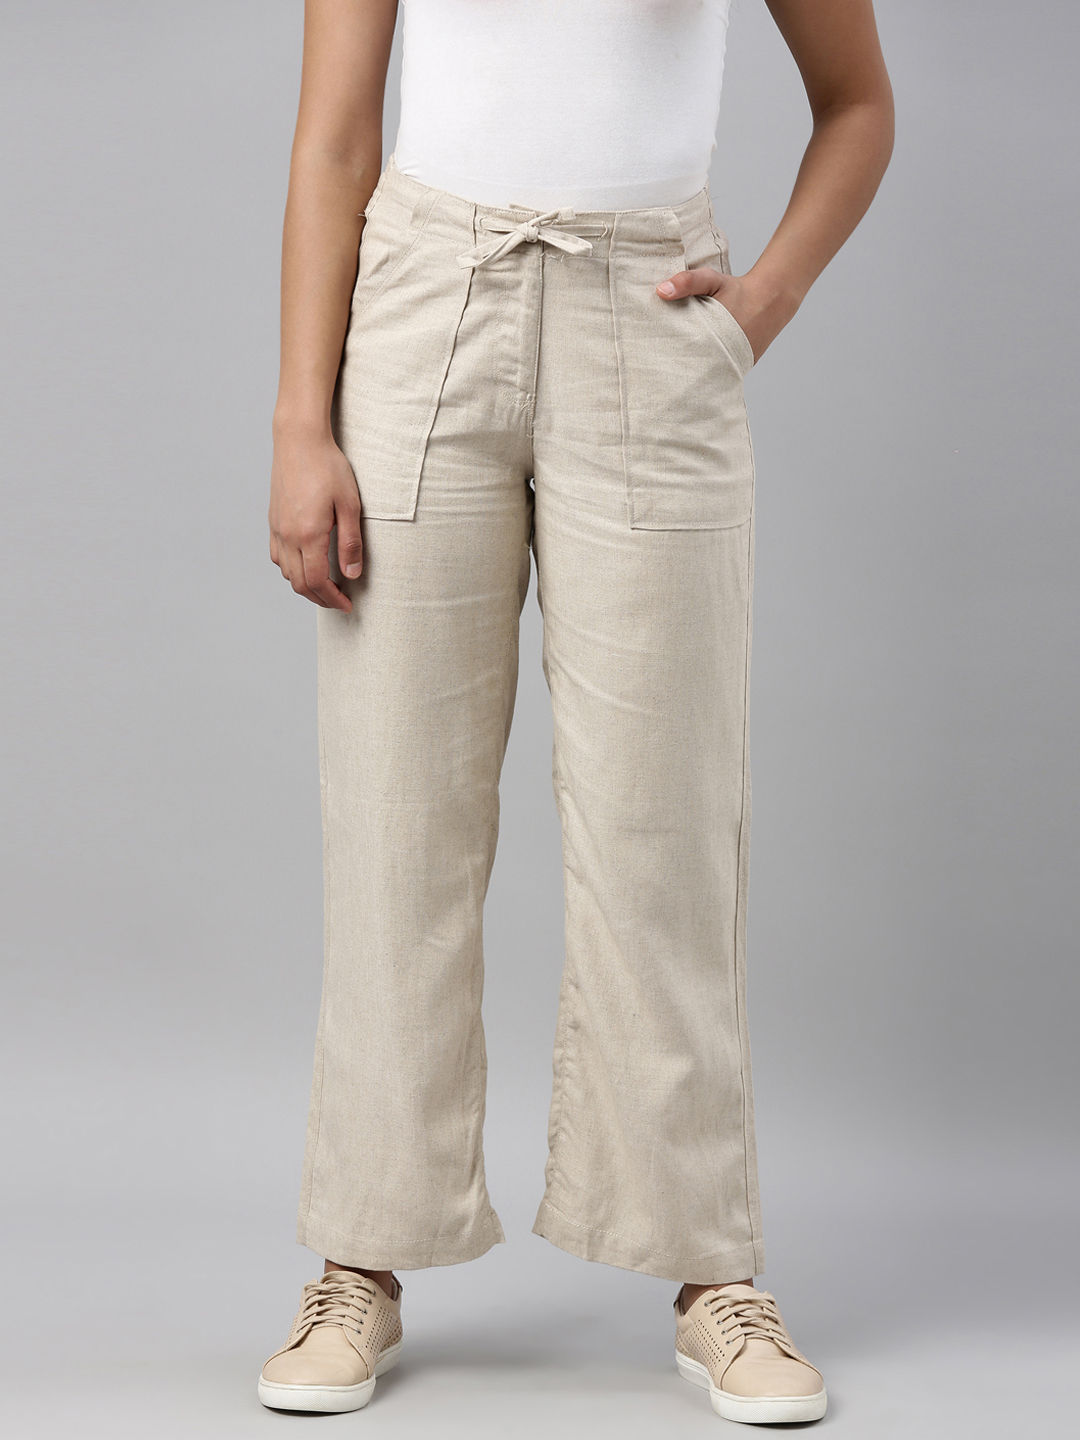 Womens Linen Pants Buy Online India  Readymade Clothing Ecommerce Store